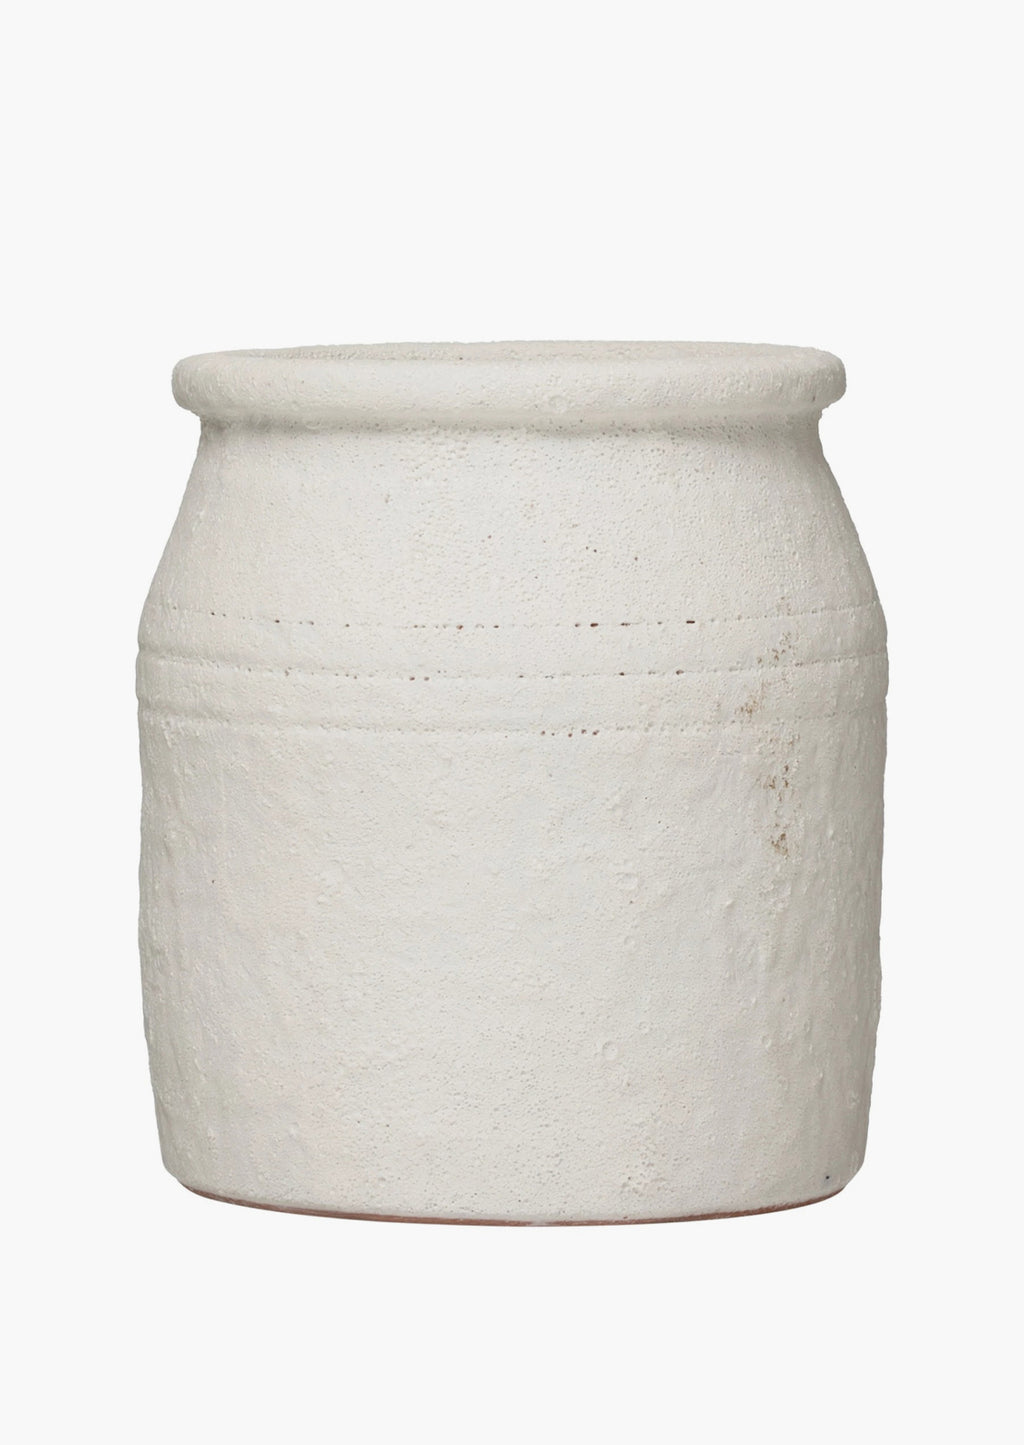 2: Crock-style utensil holder in ceramic with heavily textured, bubbly white glaze